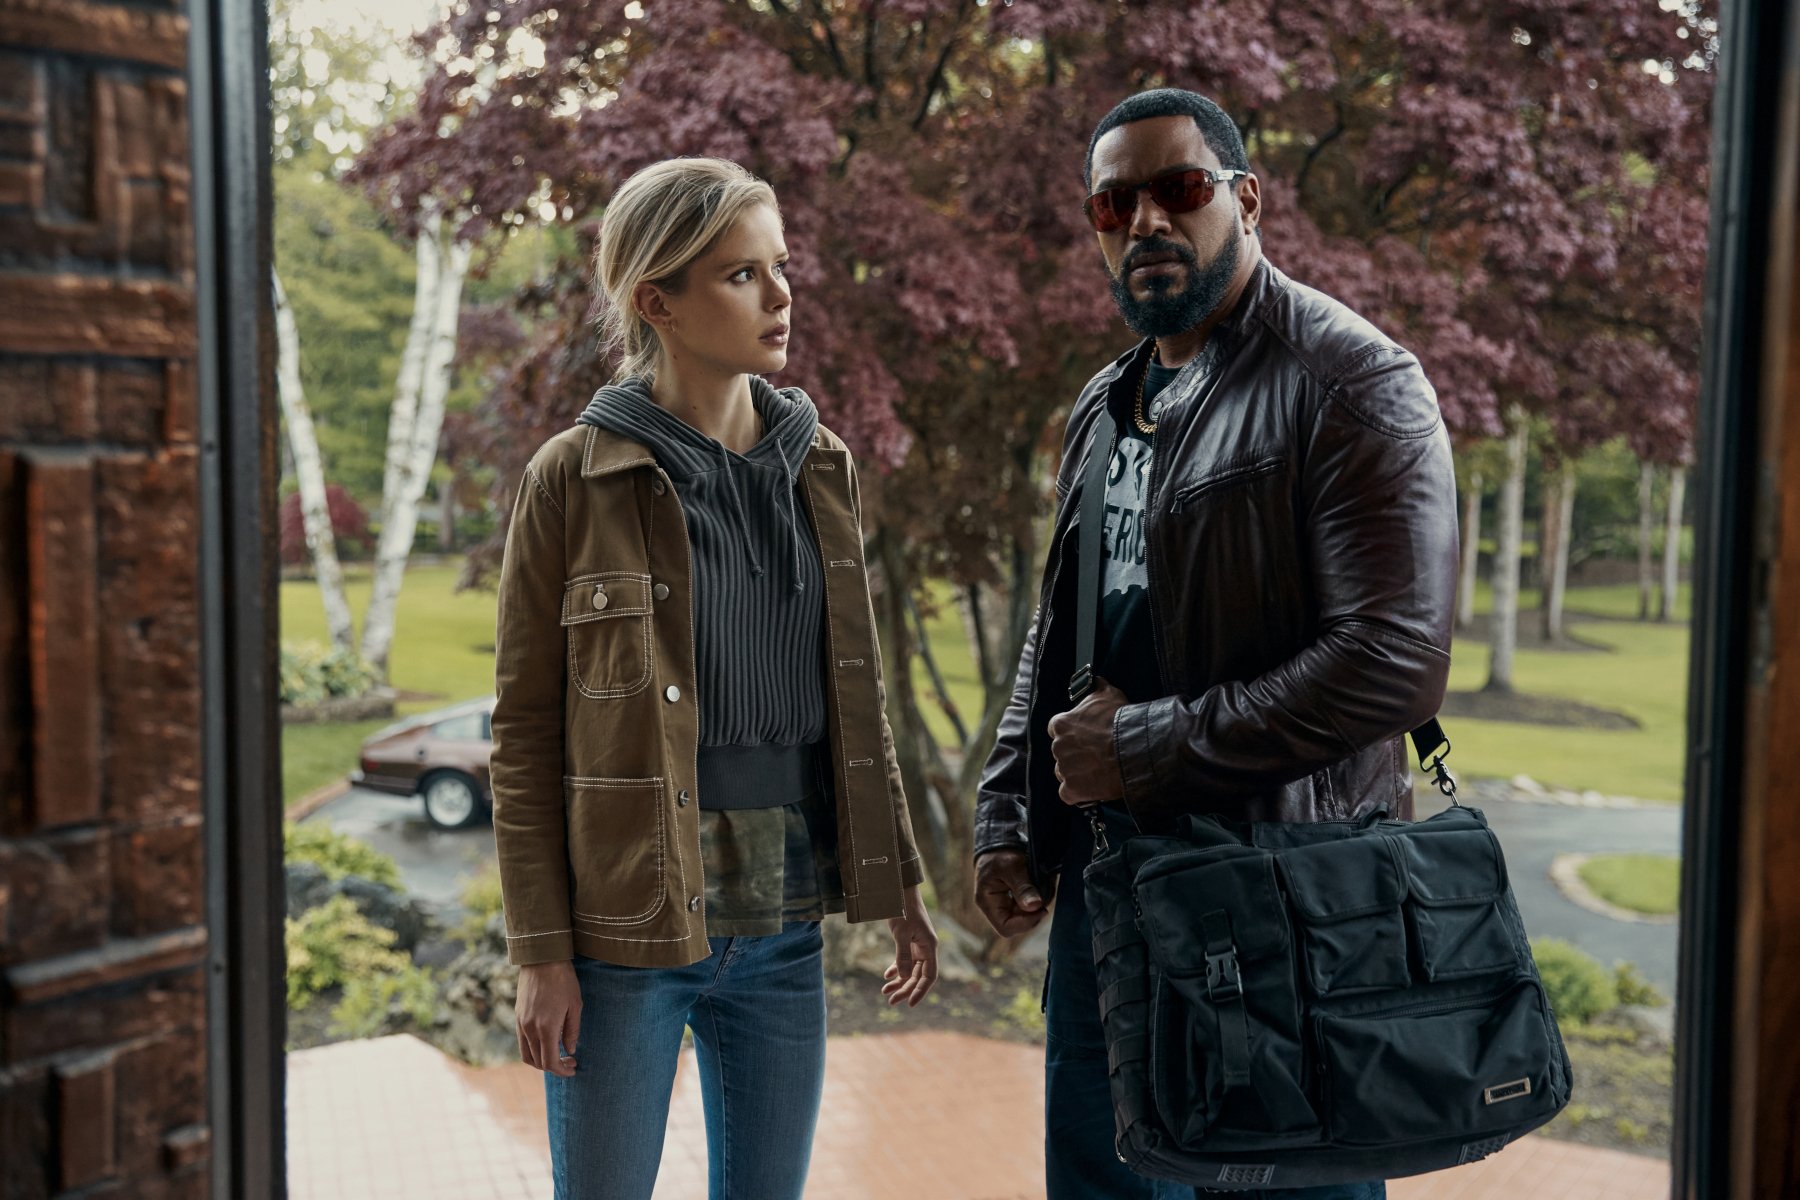 Cast members Erin Moriarty and Laz Alonso as Annie January and Mother's Milk in 'The Boys' Season 3's 'Herogasm' episode. They're standing in a doorway, and Annie is looking at Mother's Milk. Both have concerned expressions.